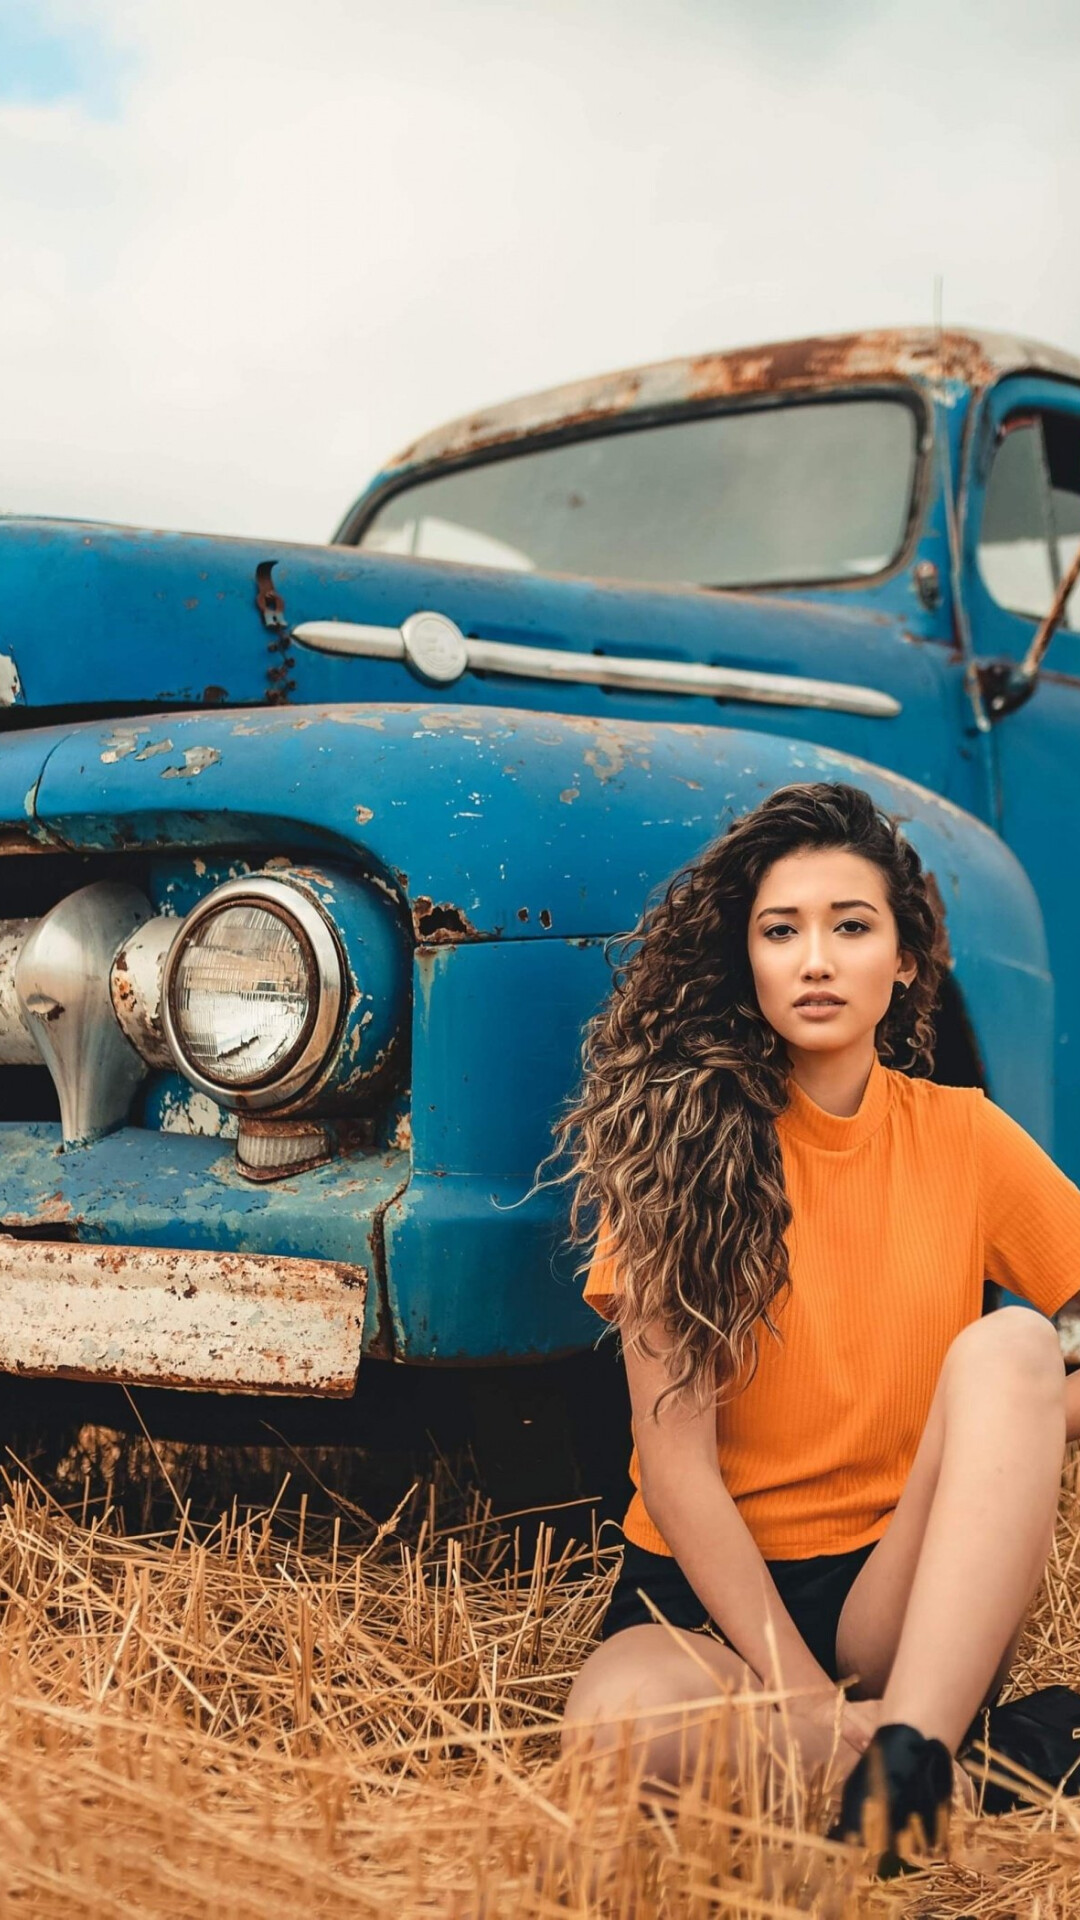 Girls and Trucks: Old rusty car, The girl sitting on the stubble field, Retro Ford vehicle. 1080x1920 Full HD Background.